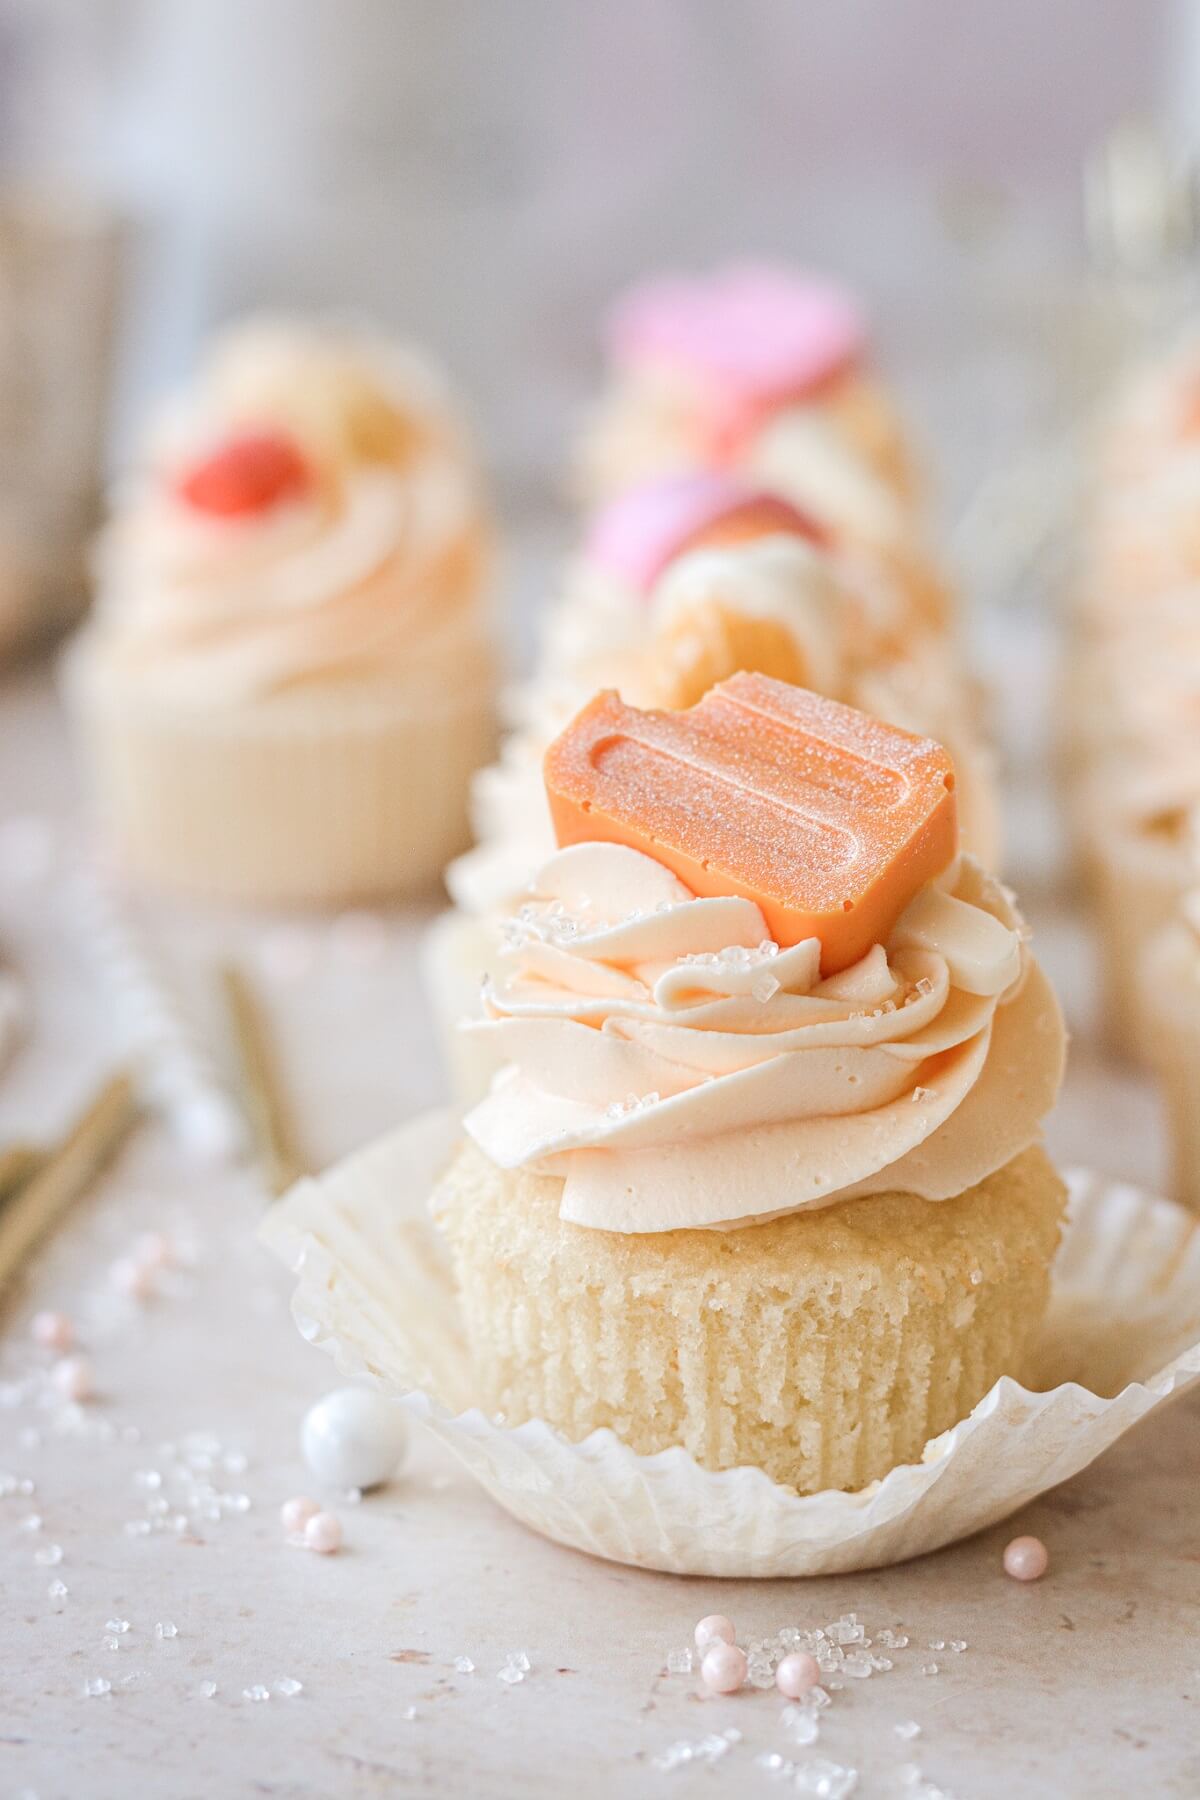 An orange creamsicle cupcake with the wrapper unwrapped.